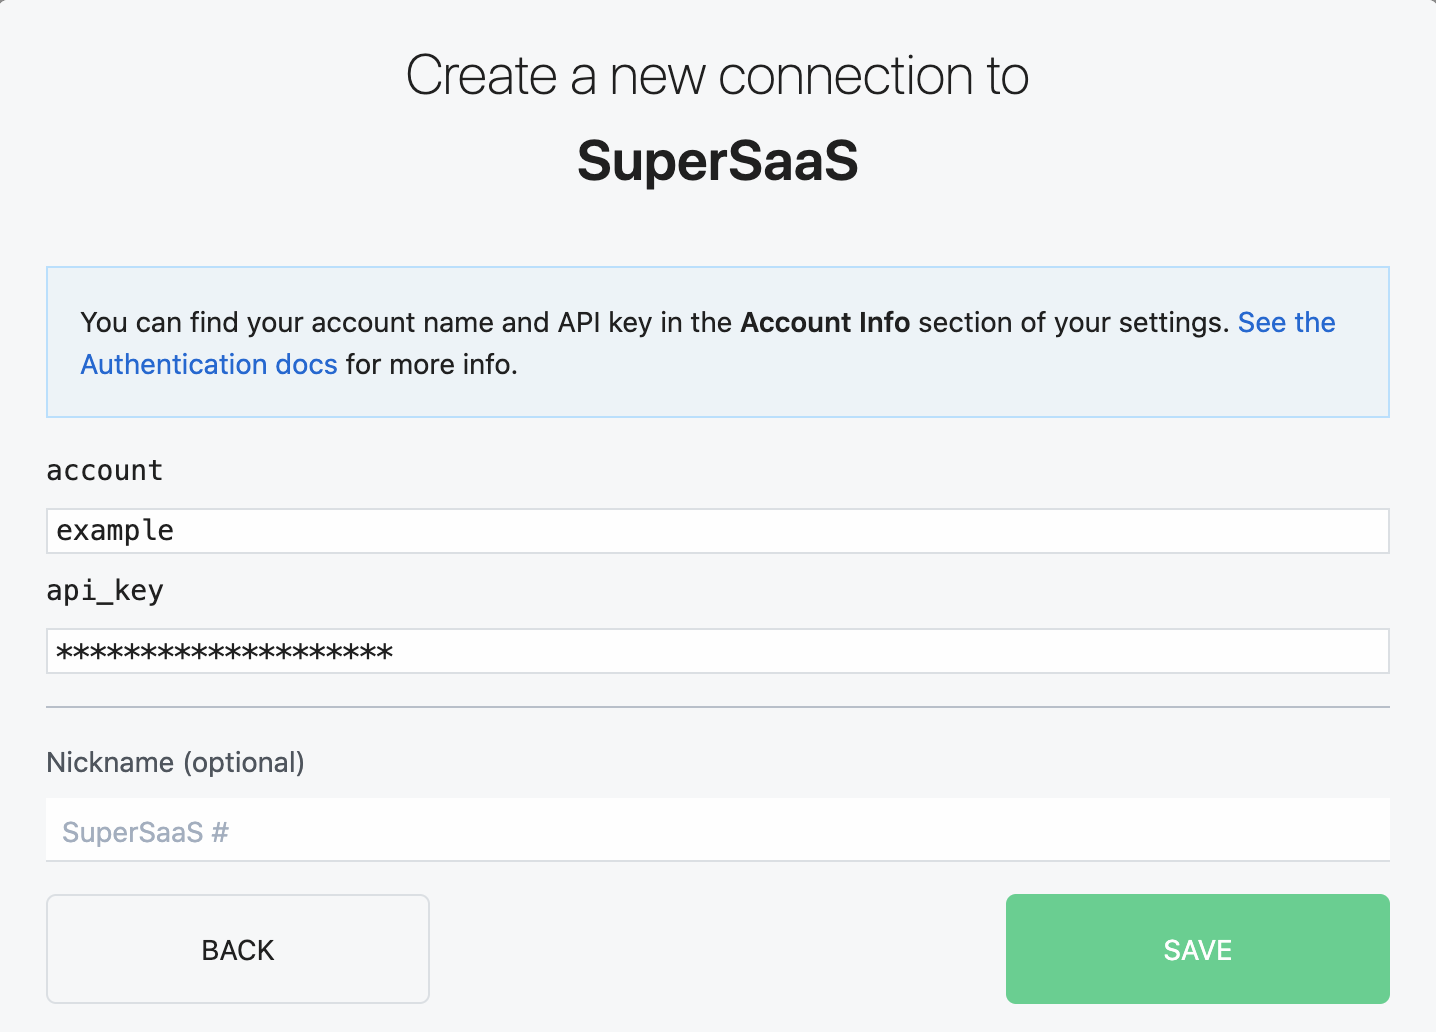 Pipedream dialog screenshot showing a form for the creation of a new connection to an example SuperSaaS account